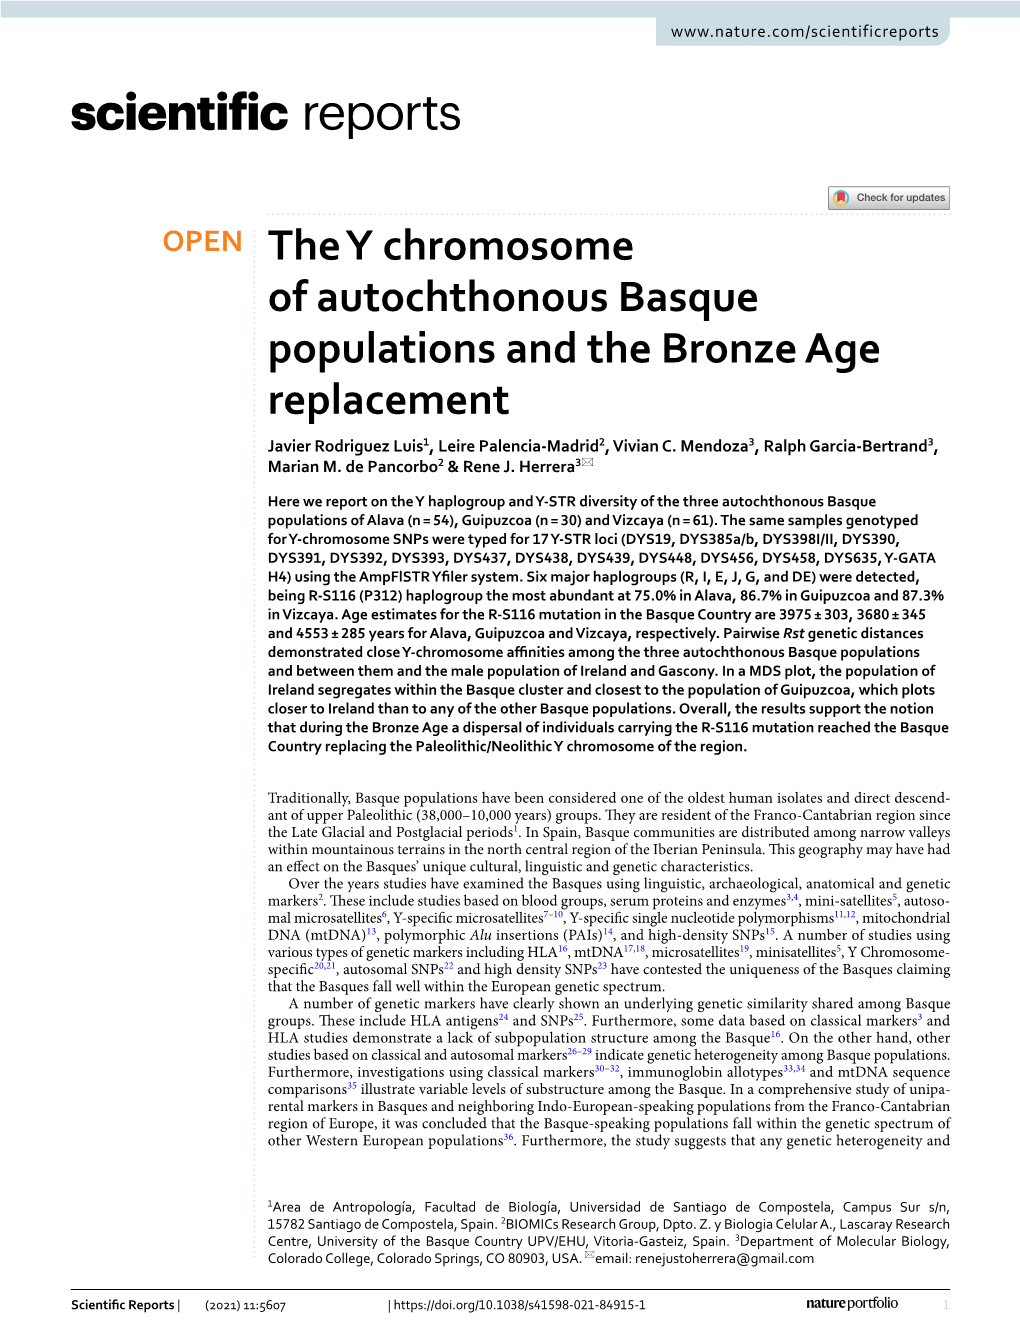 The Y Chromosome of Autochthonous Basque Populations and the Bronze Age Replacement Javier Rodriguez Luis1, Leire Palencia‑Madrid2, Vivian C